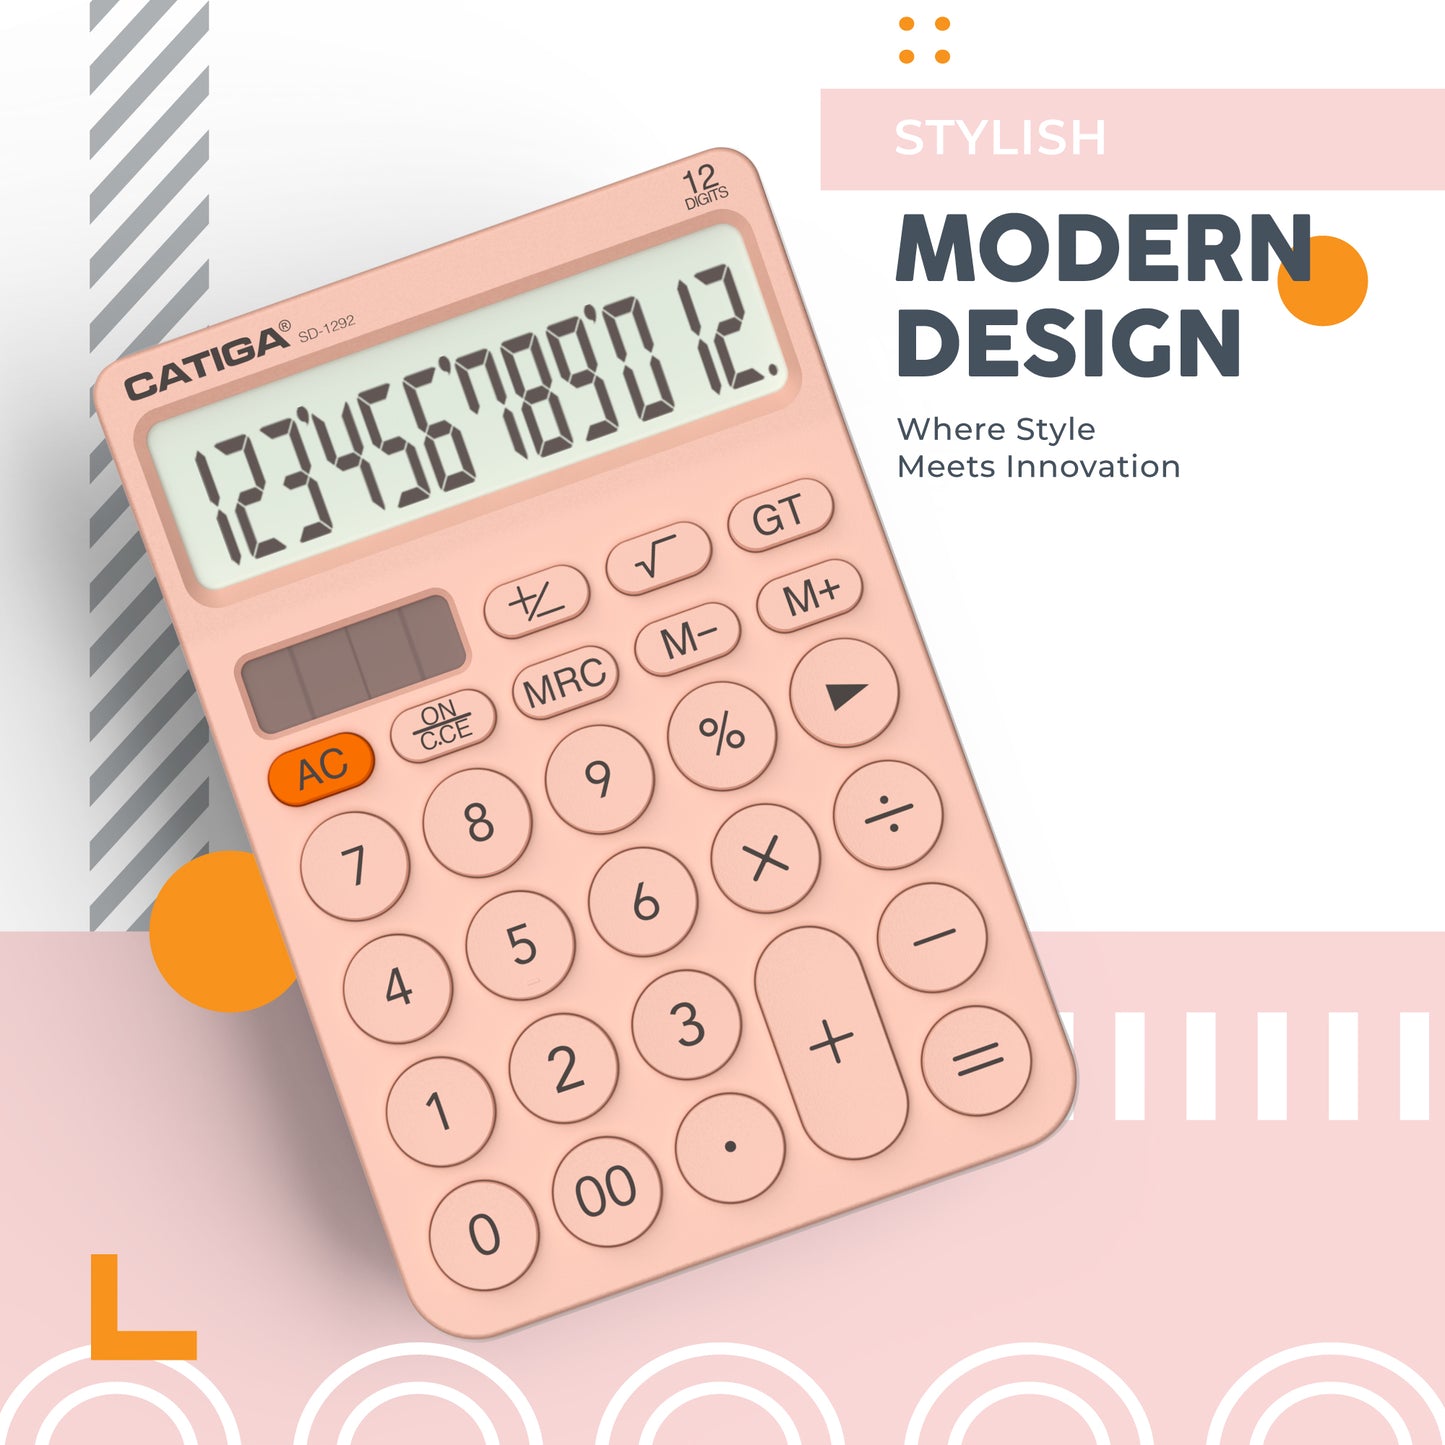 SD-1292 12-Digit Home and Office Calculator (Pink/Black)